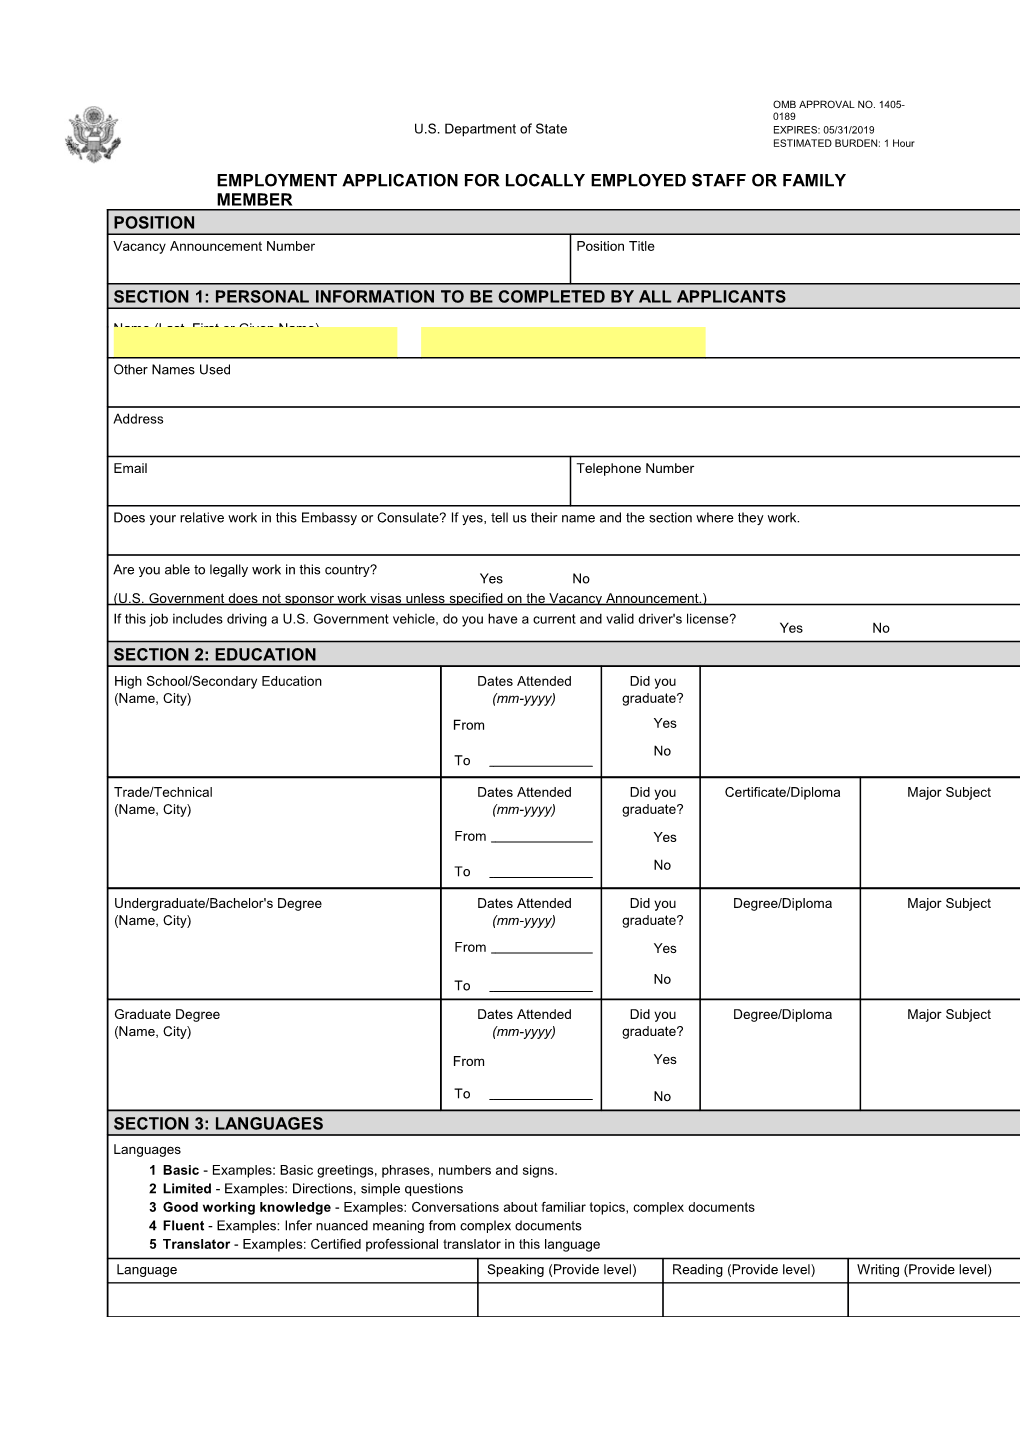 Employment Application for Locally Employed Staff Or Family Member